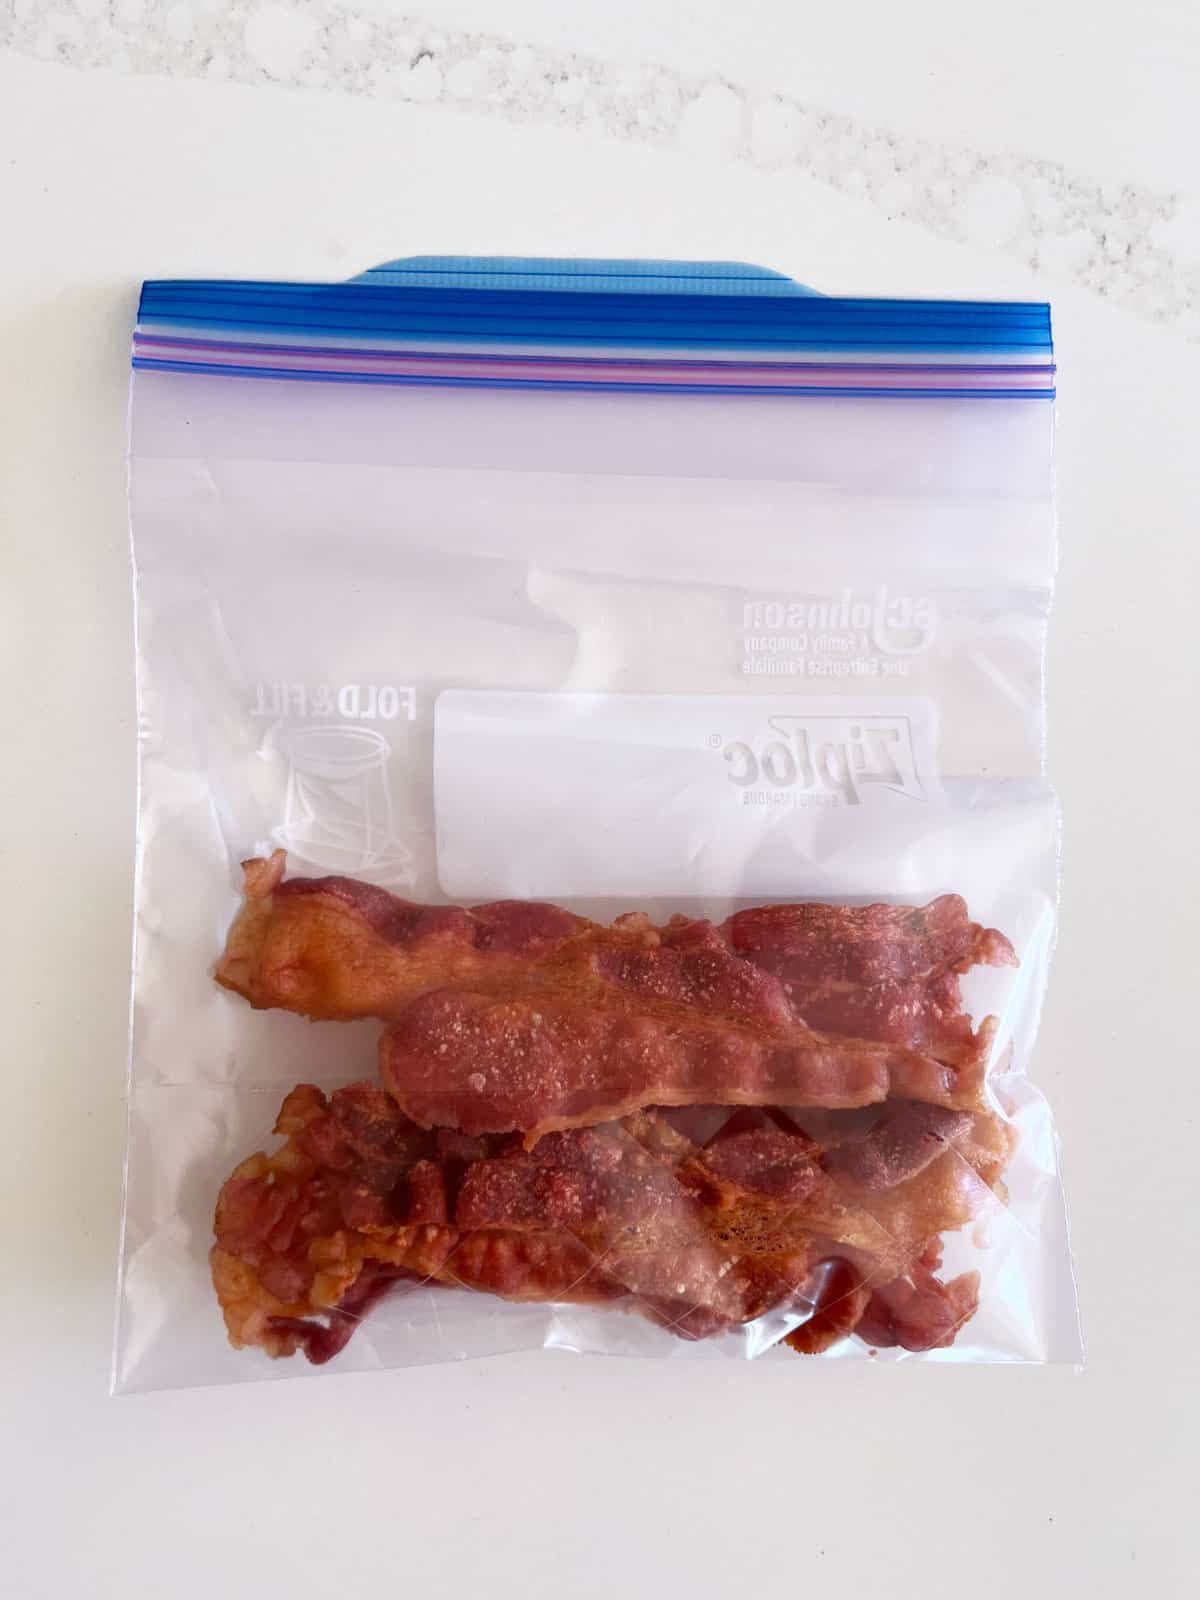 Leftover bacon is stored in a resealable bag.